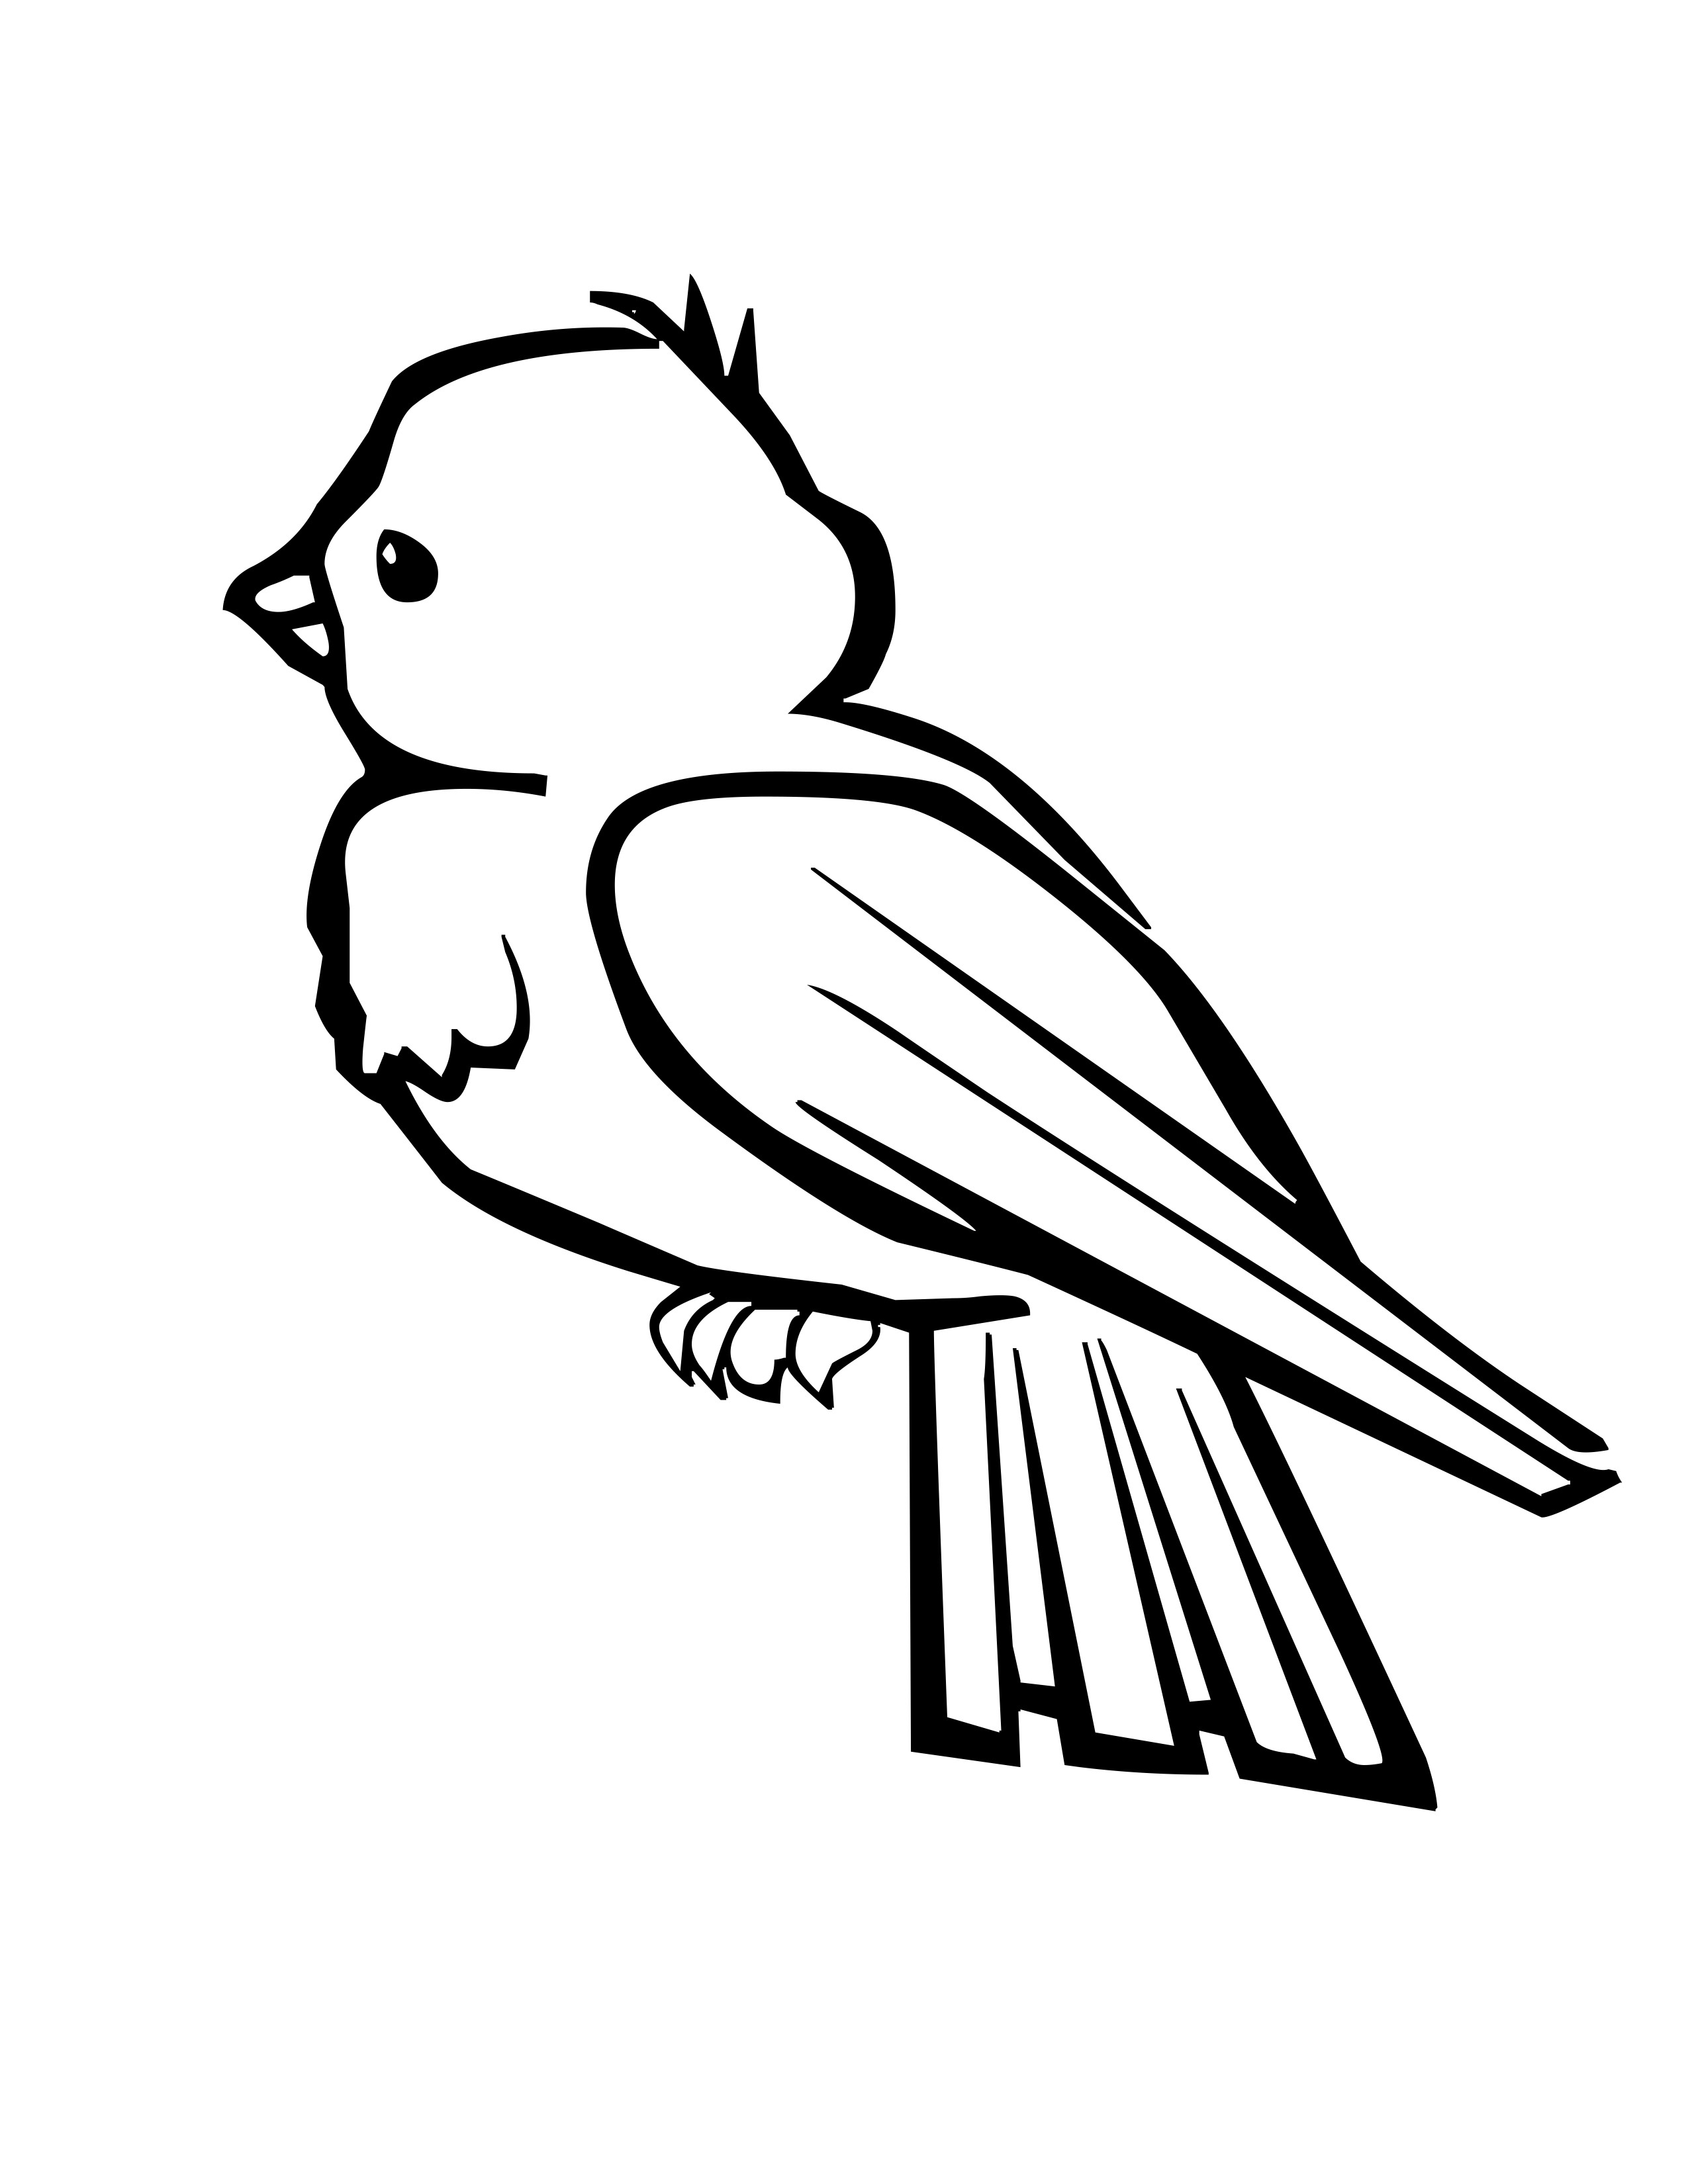 Blue bird clipart black and white